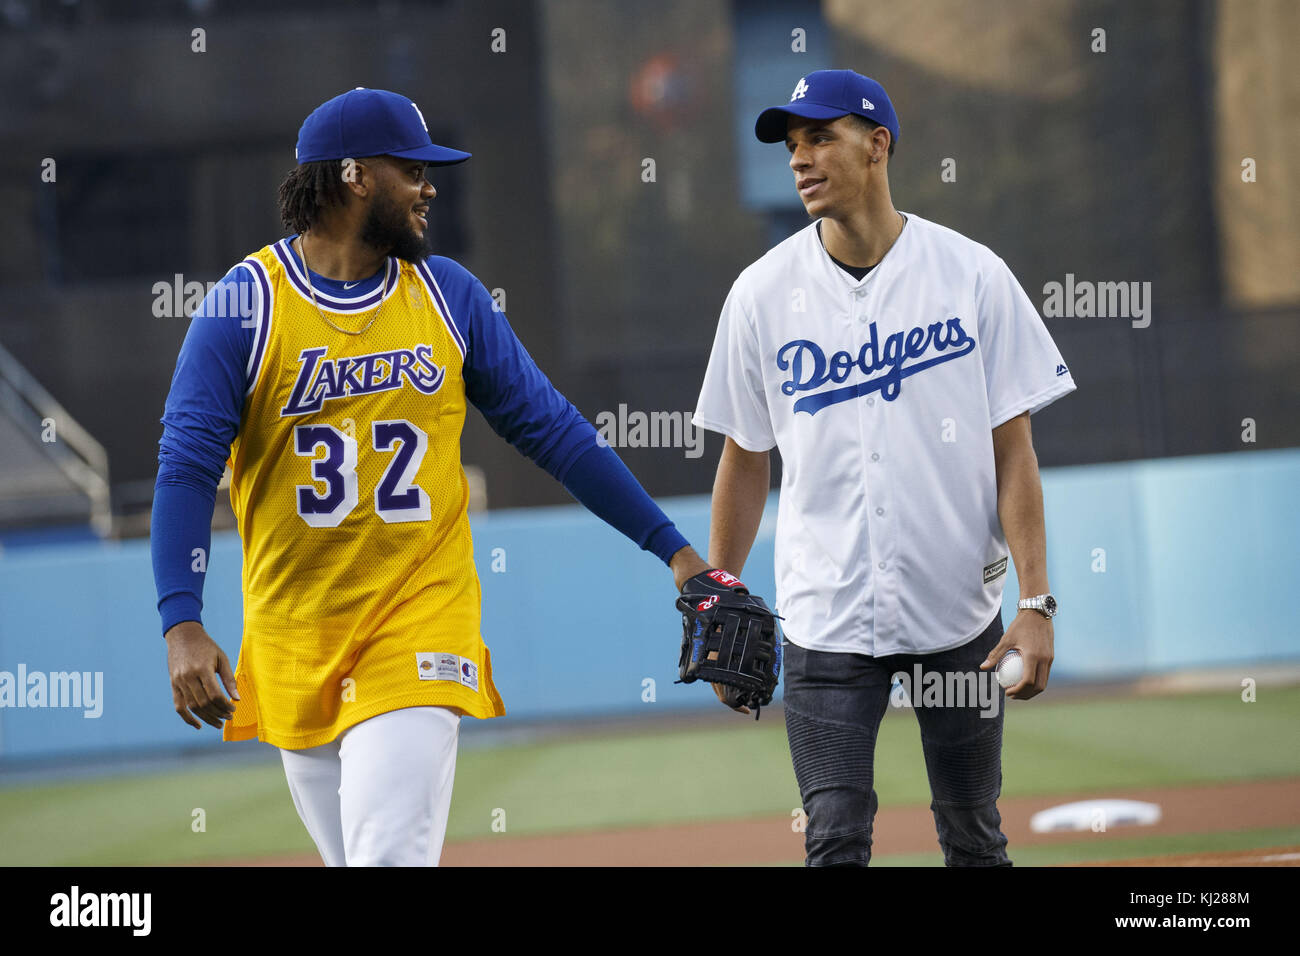 El Segundo, California, USA. 23rd June, 2017. Dodgers pitcher Kenley Jansen,  wearing a Lakers jersey, shares a moment with Lakers draft pick Lonzo Ball  after he threw out the first pitch at